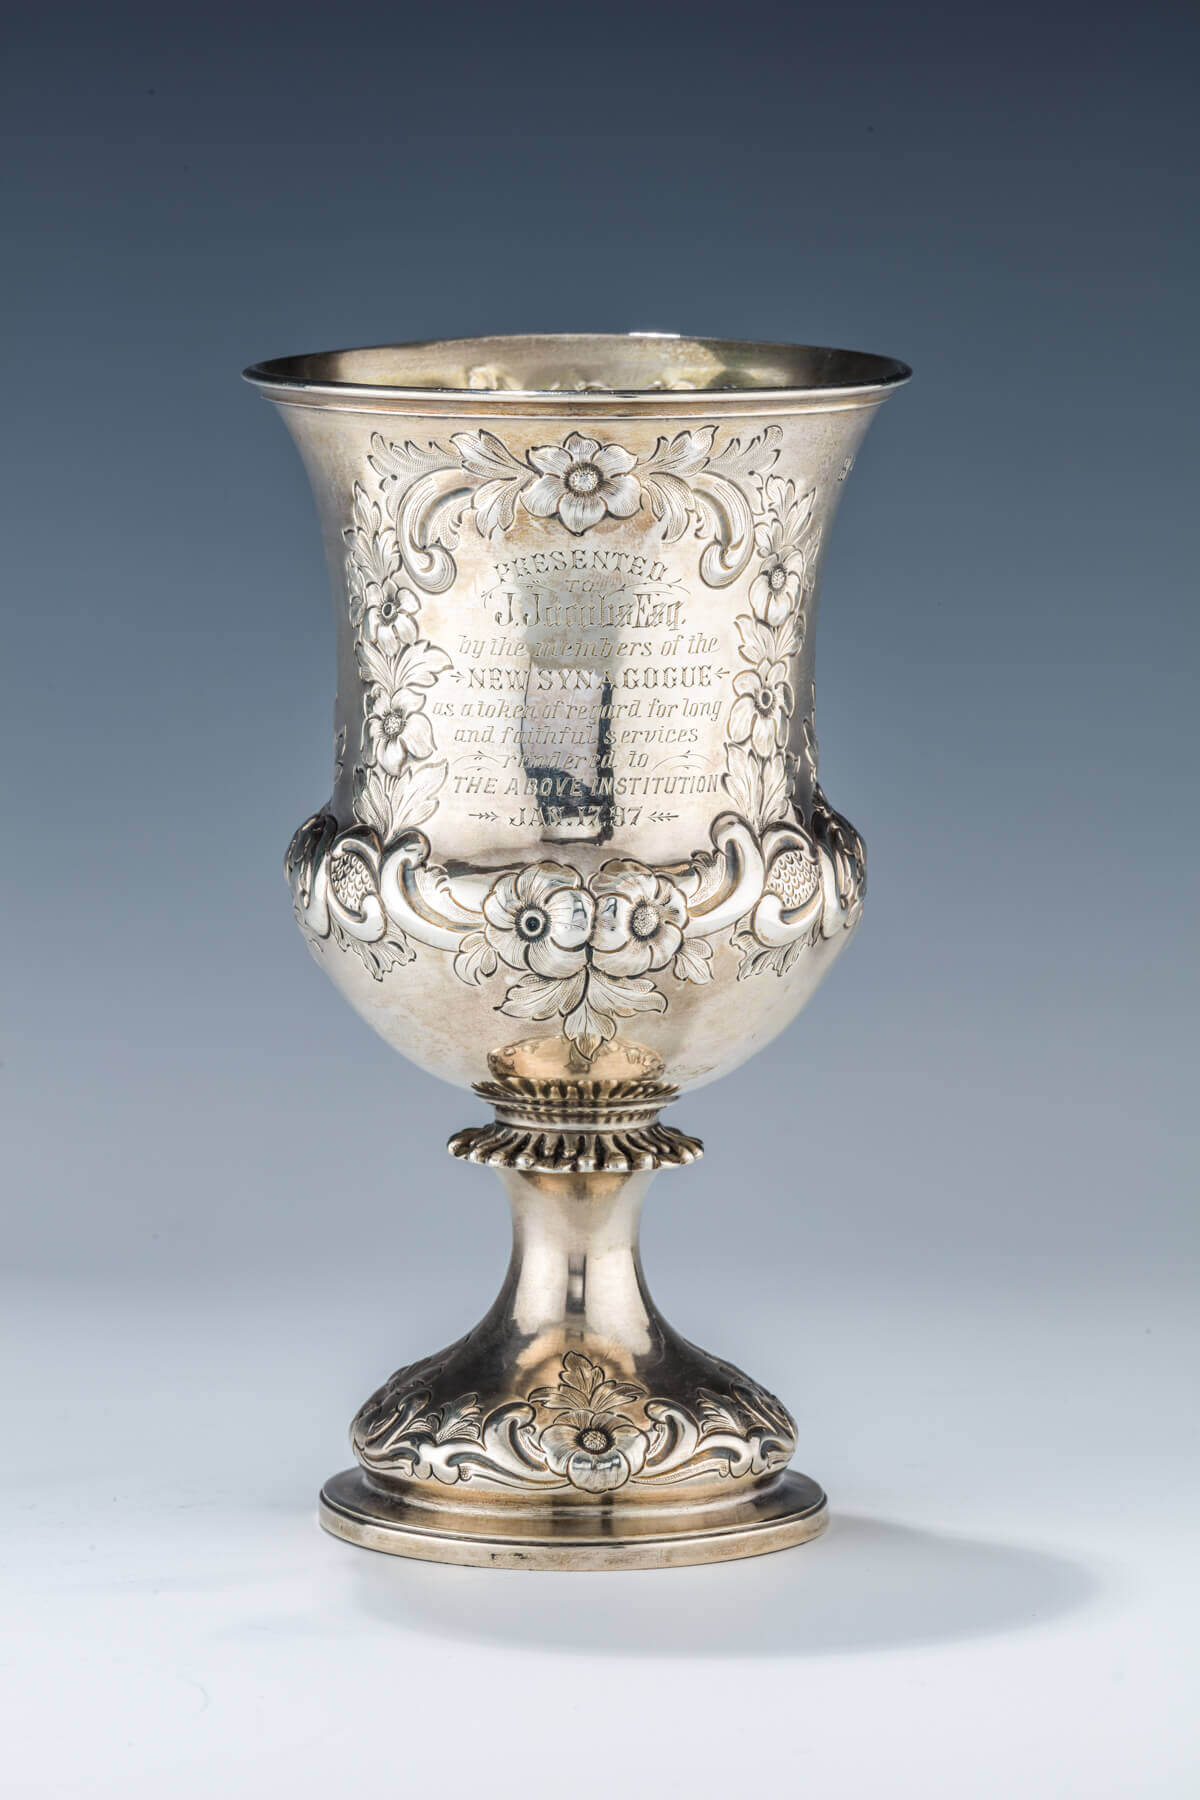 101. A LARGE STERLING SILVER GOBLET BY GEORGE JOHN RICHARDS AND EDWARD CHARLES BROWN